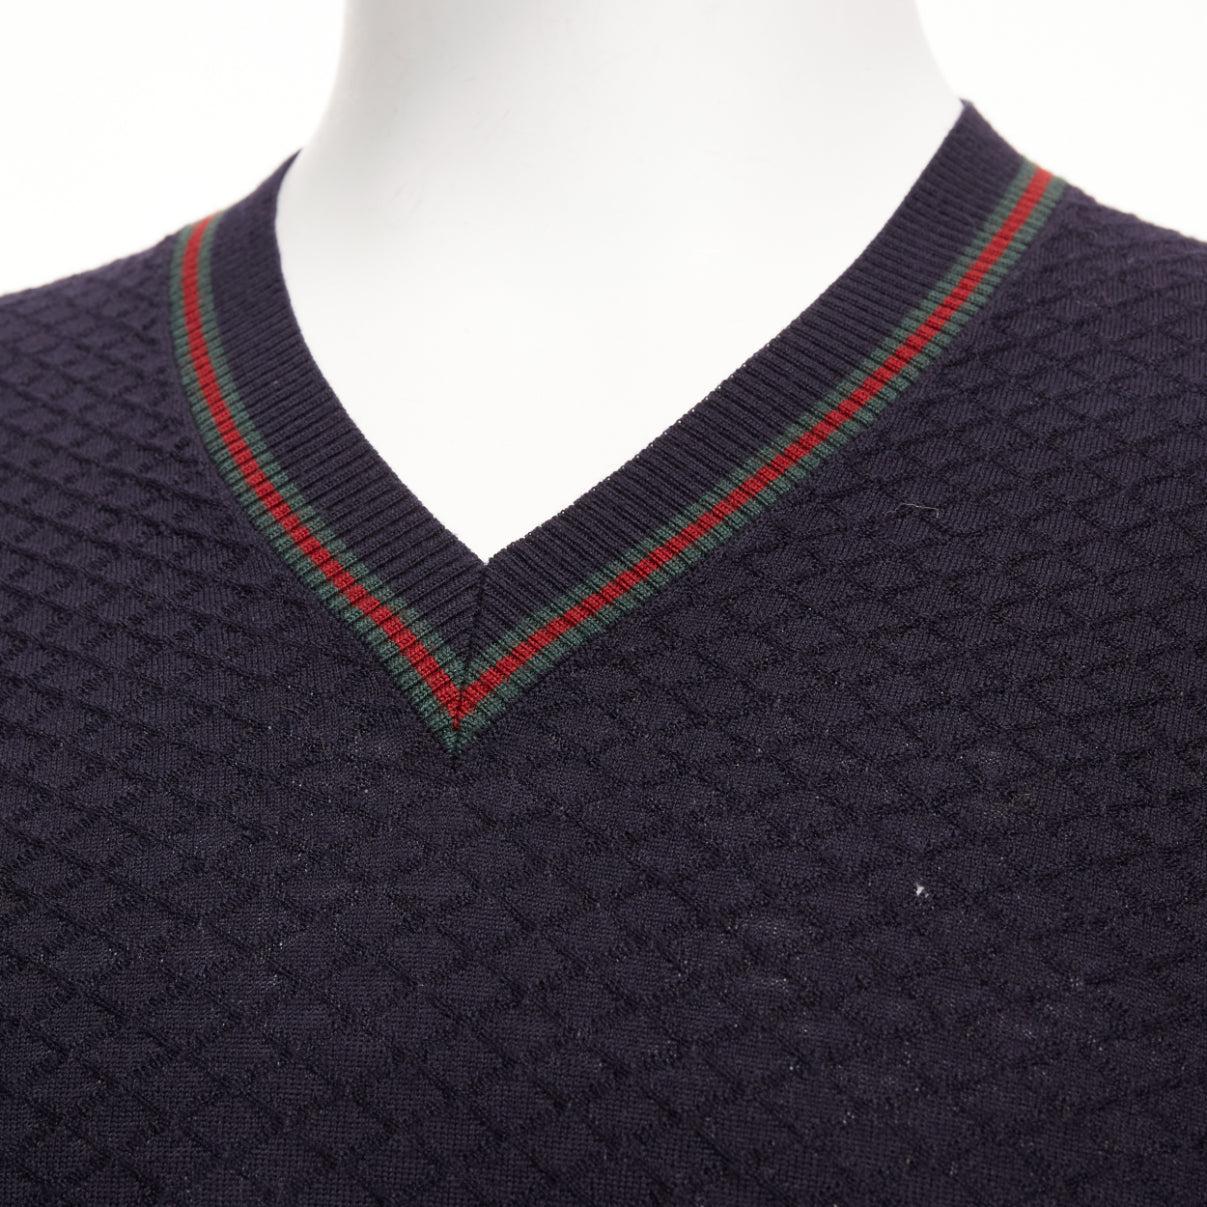 GUCCI navy 100% wool green red web v neck long sleeve sweater M
Reference: JSLE/A00121
Brand: Gucci
Material: Wool
Color: Navy, Multicolour
Pattern: Striped
Closure: Pullover
Made in: Italy

CONDITION:
Condition: Poor, this item was pre-owned and is